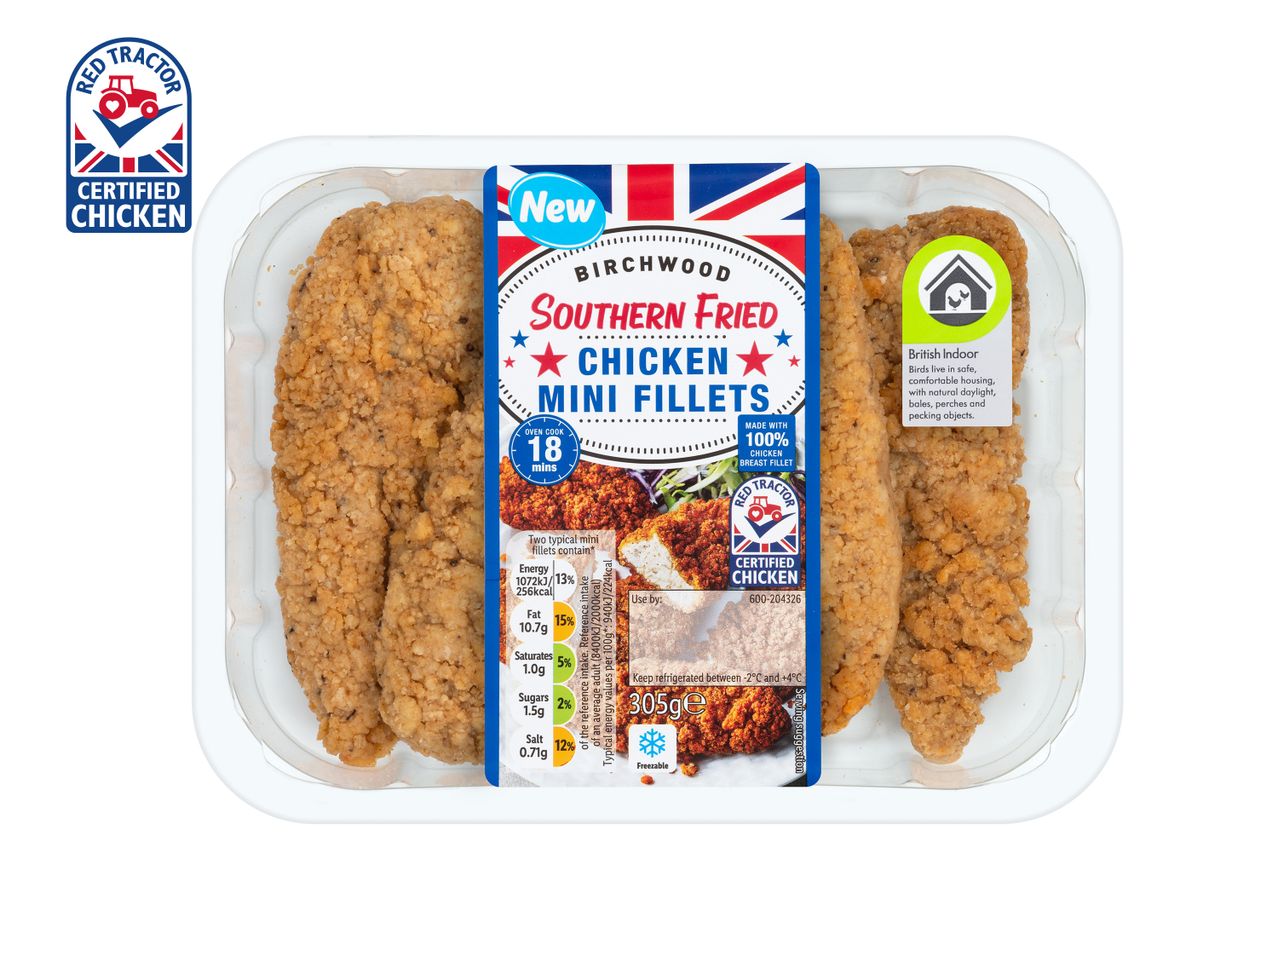 Go to full screen view: Birchwood Southern Fried Chicken Mini Fillets - Image 1